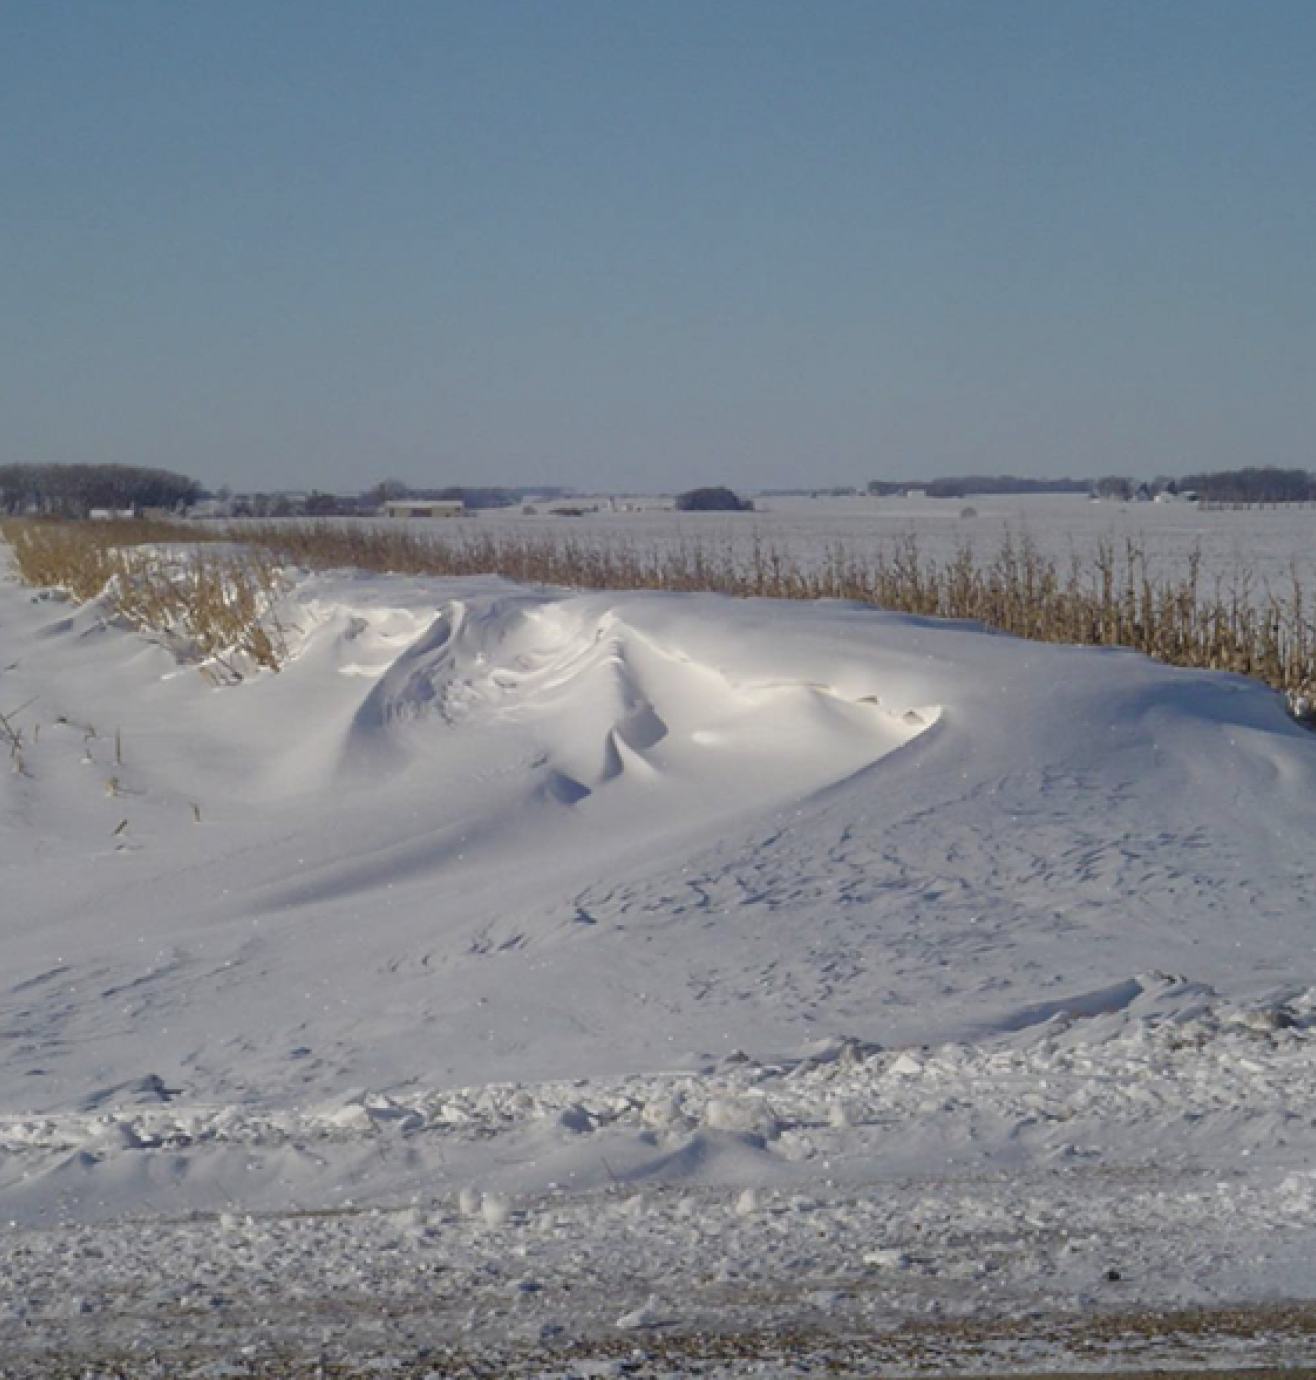 Standing corn row half-buried in drifted snow